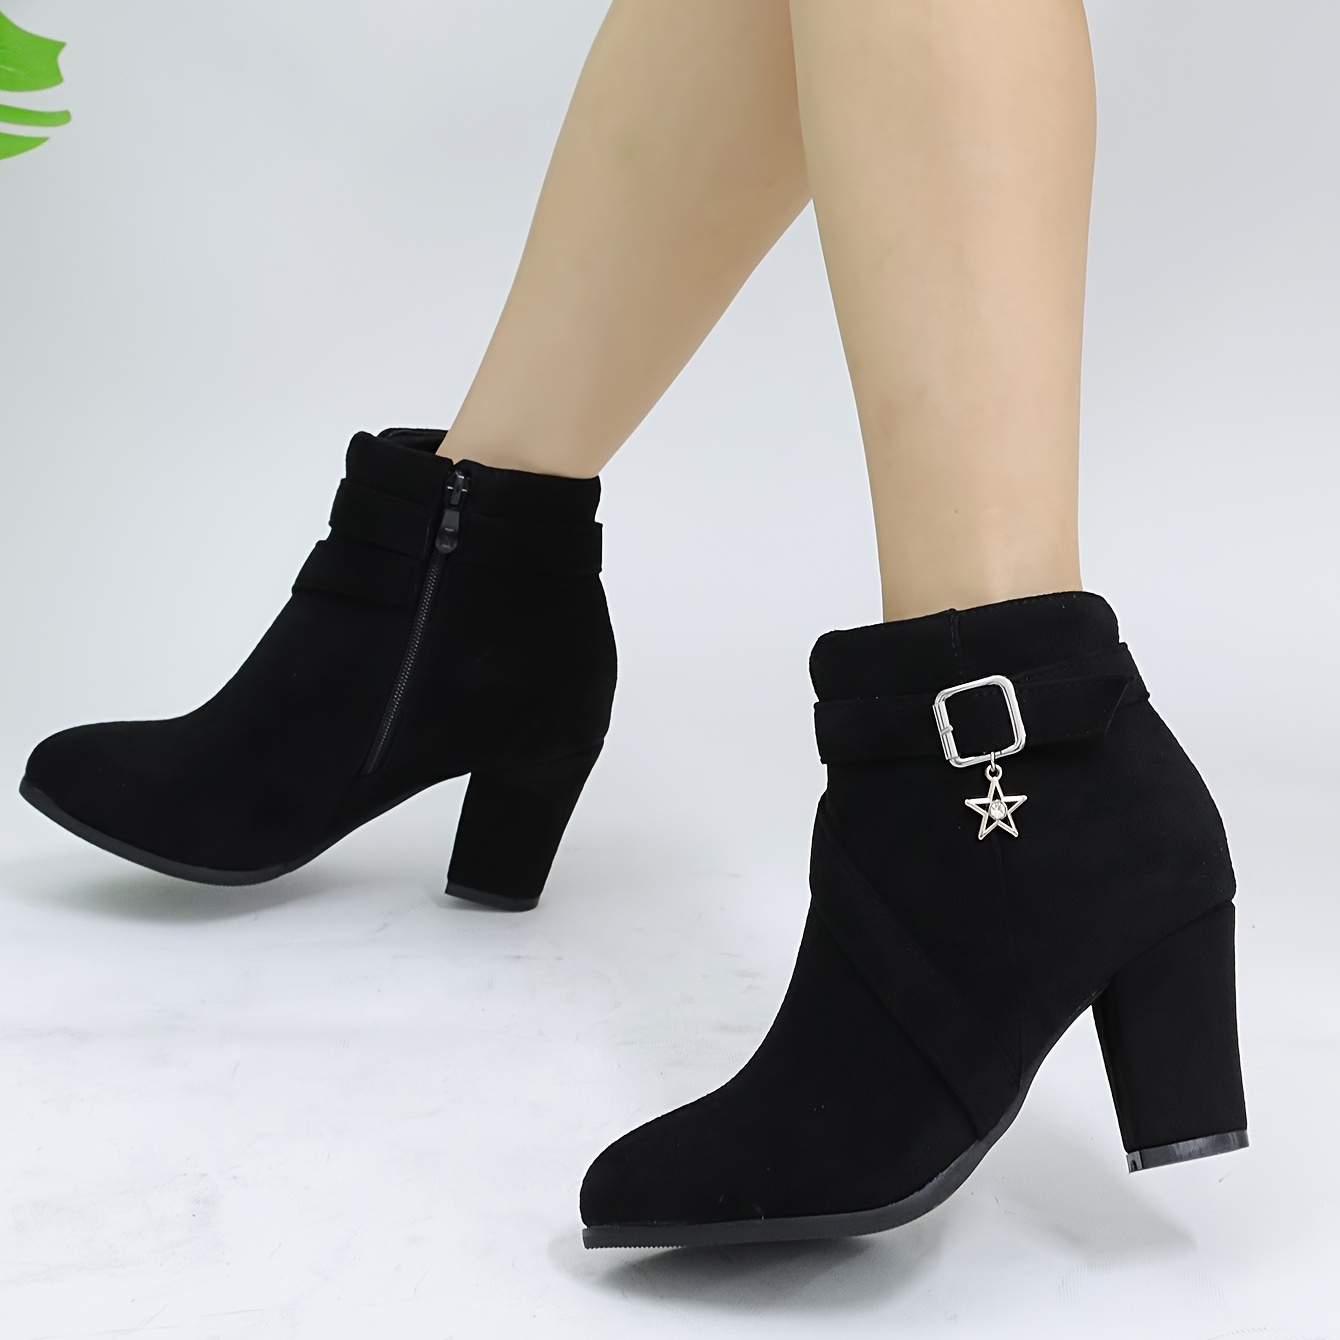 Black Toe White Ankle Boots, Block High Heel Shoes